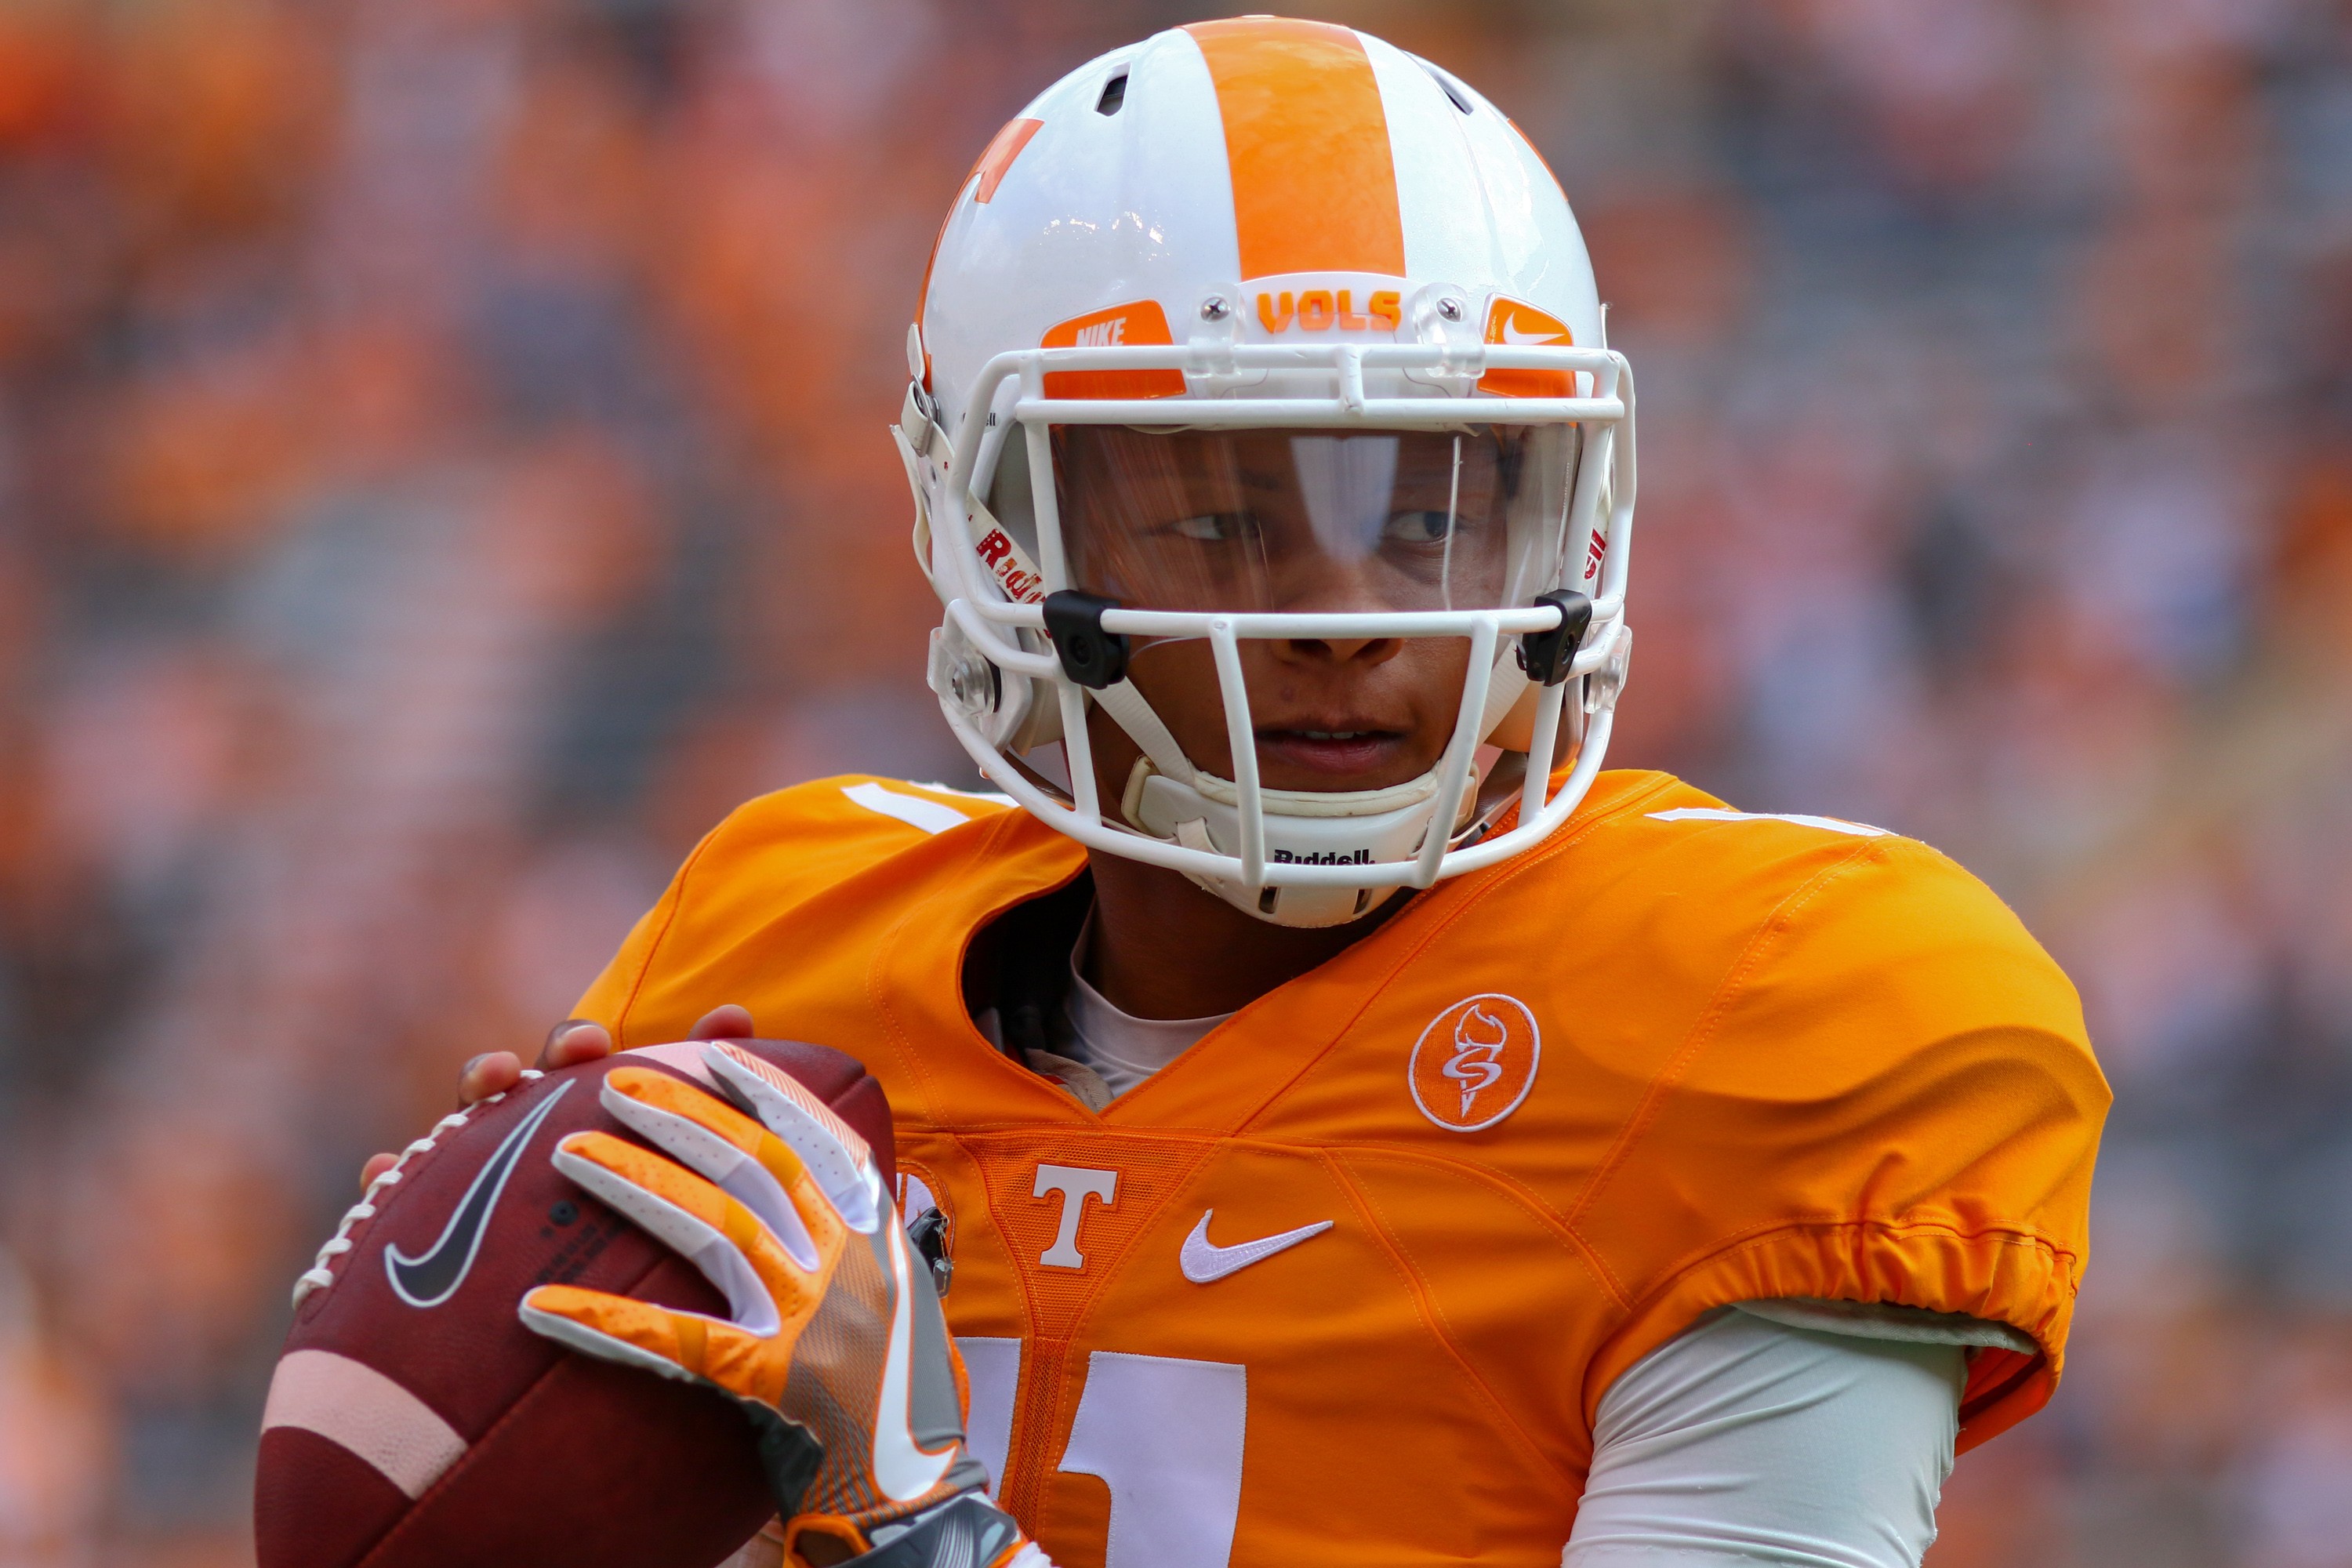 Former Tennessee Vols quarterback and current Pittsburgh Steelers QB Josh Dobbs spotted at